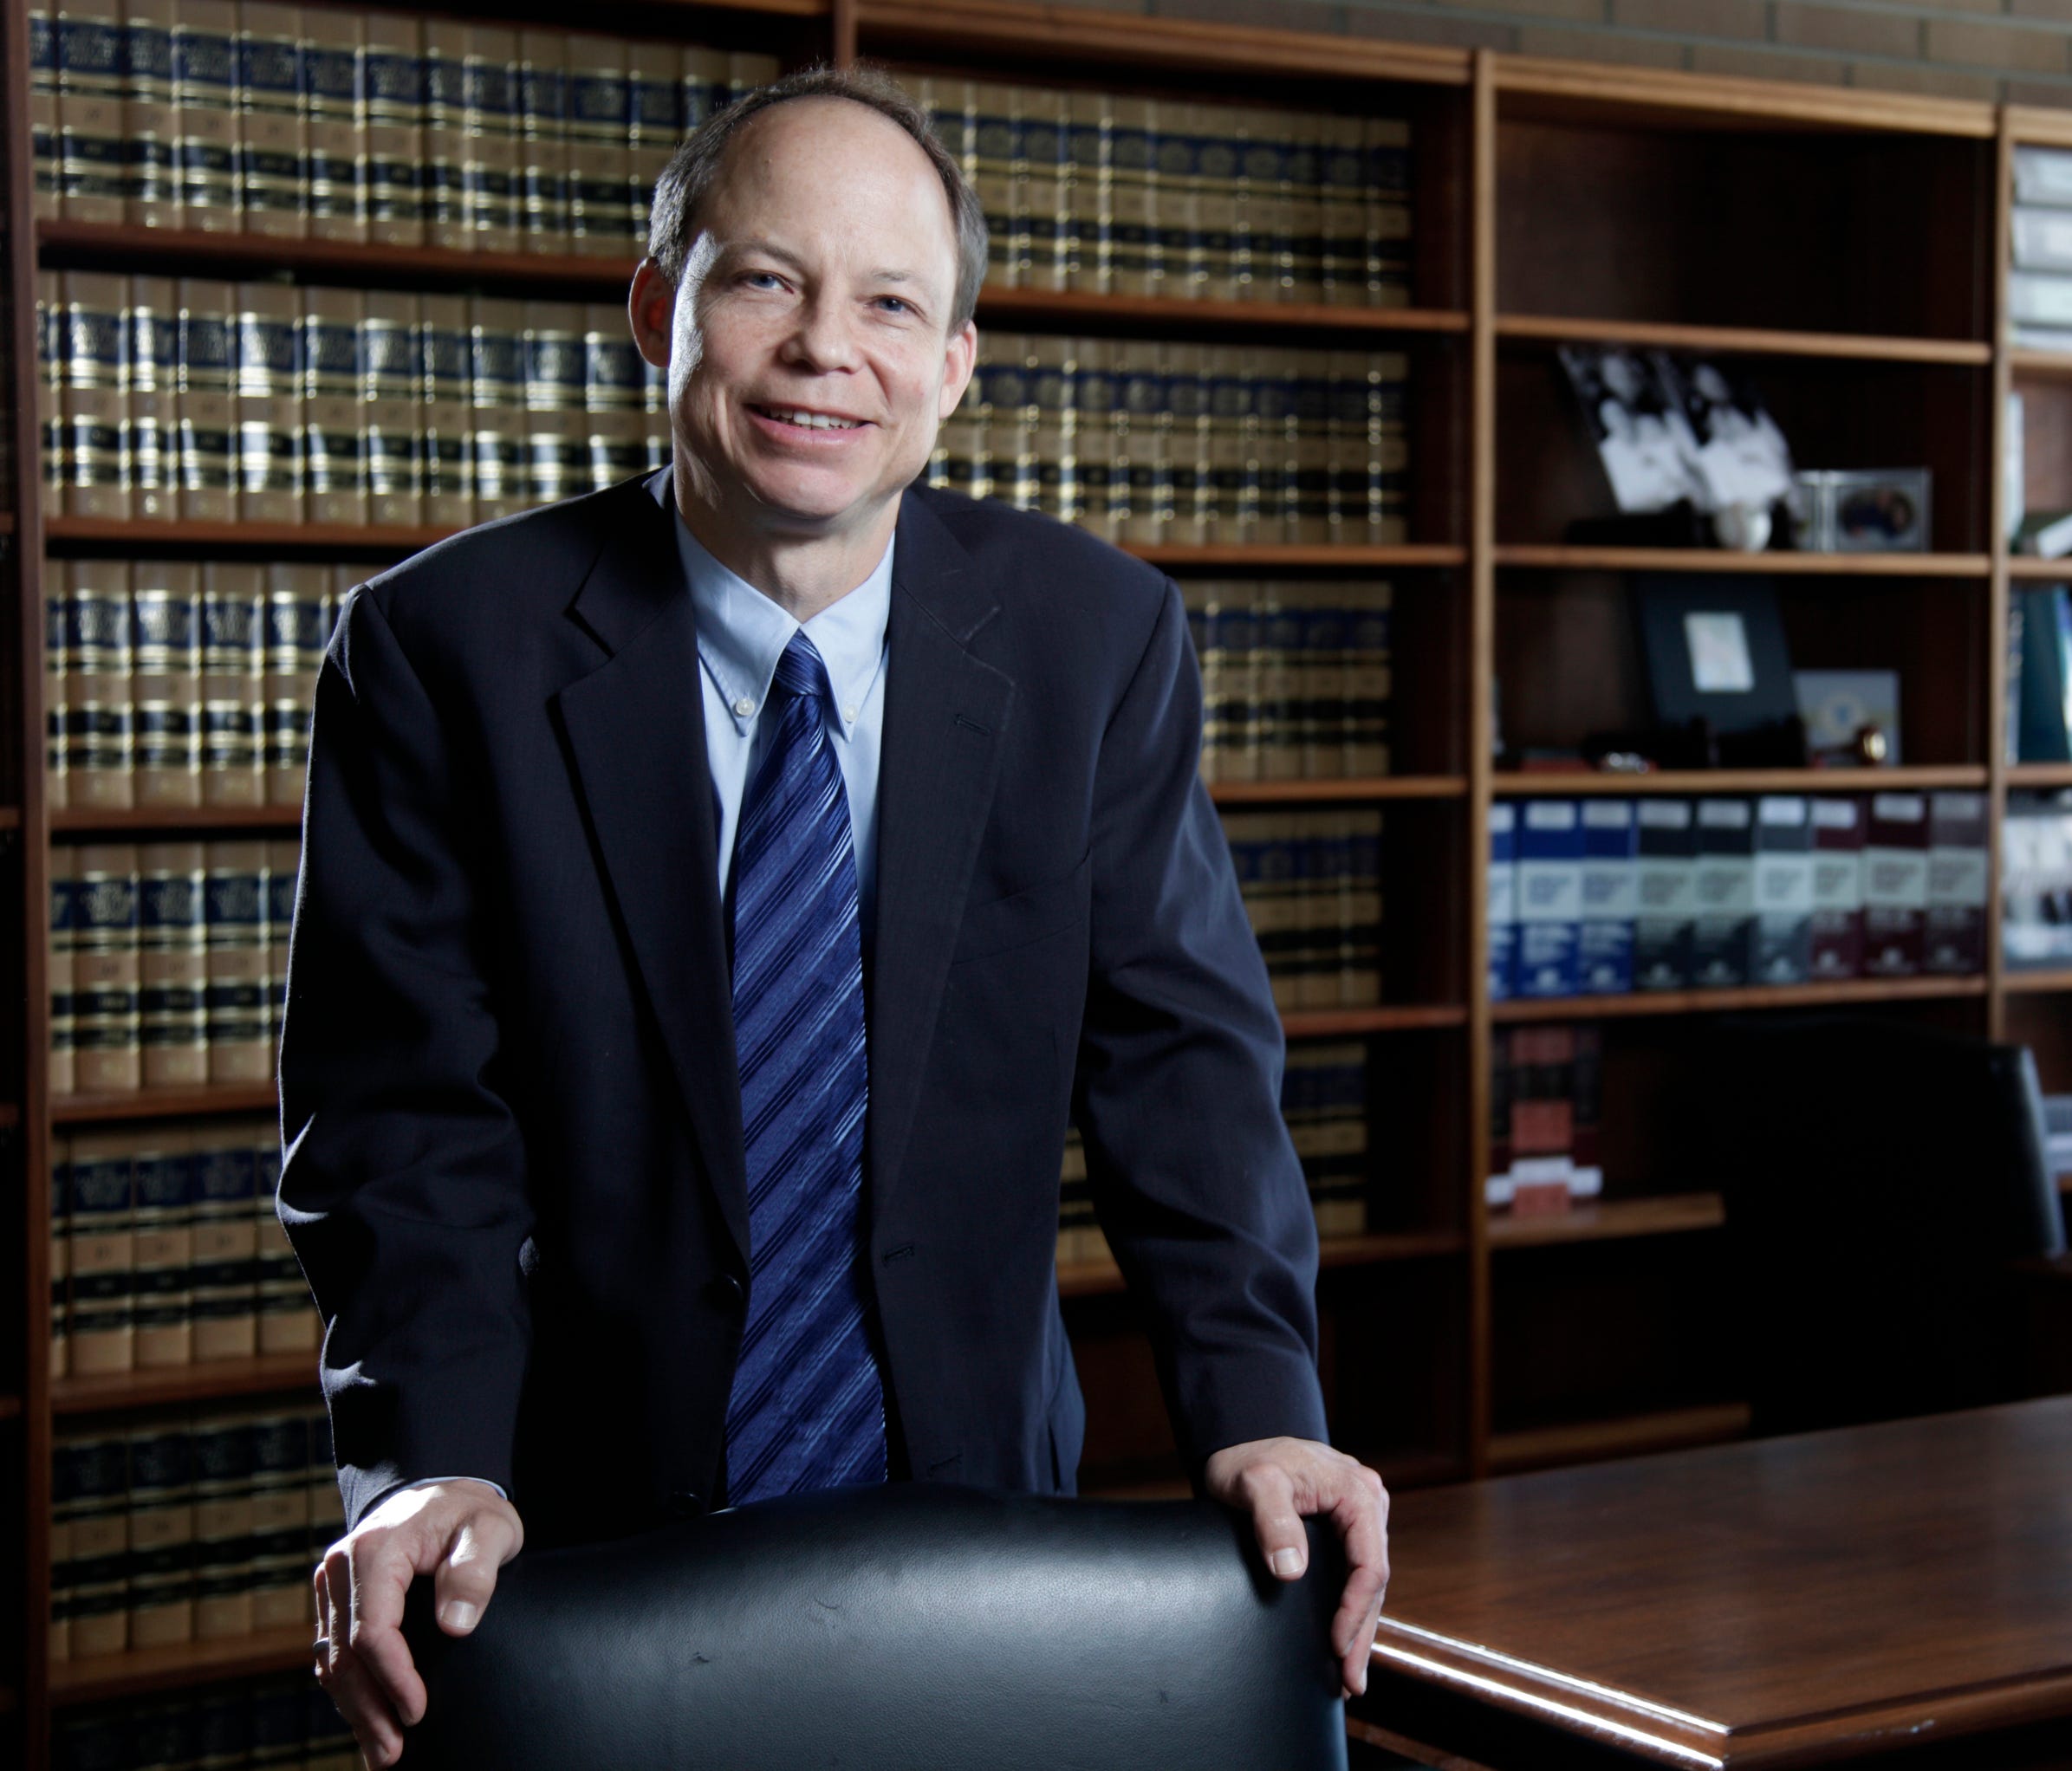 Santa Clara County Superior Court Judge Aaron Persky in 2011. He is drawing sharp criticism for sentencing former Stanford University swimmer Brock Turner to only six months in jail for sexually assaulting an unconscious woman.